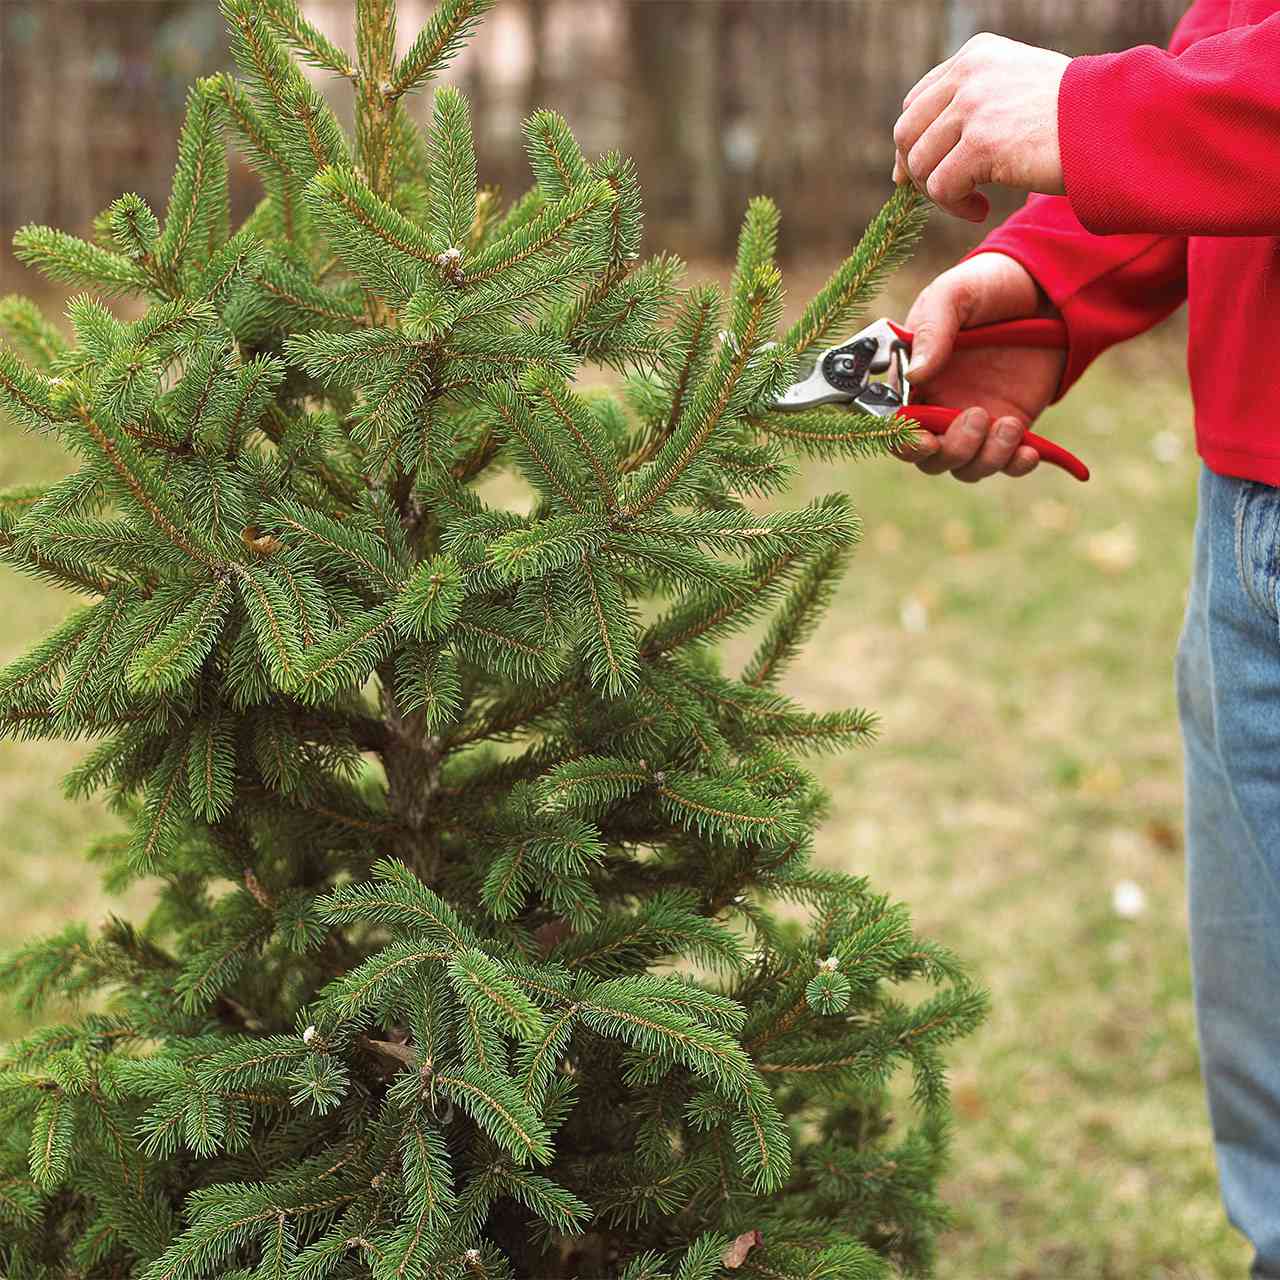 man in red shirt pruning spruce tree with shears